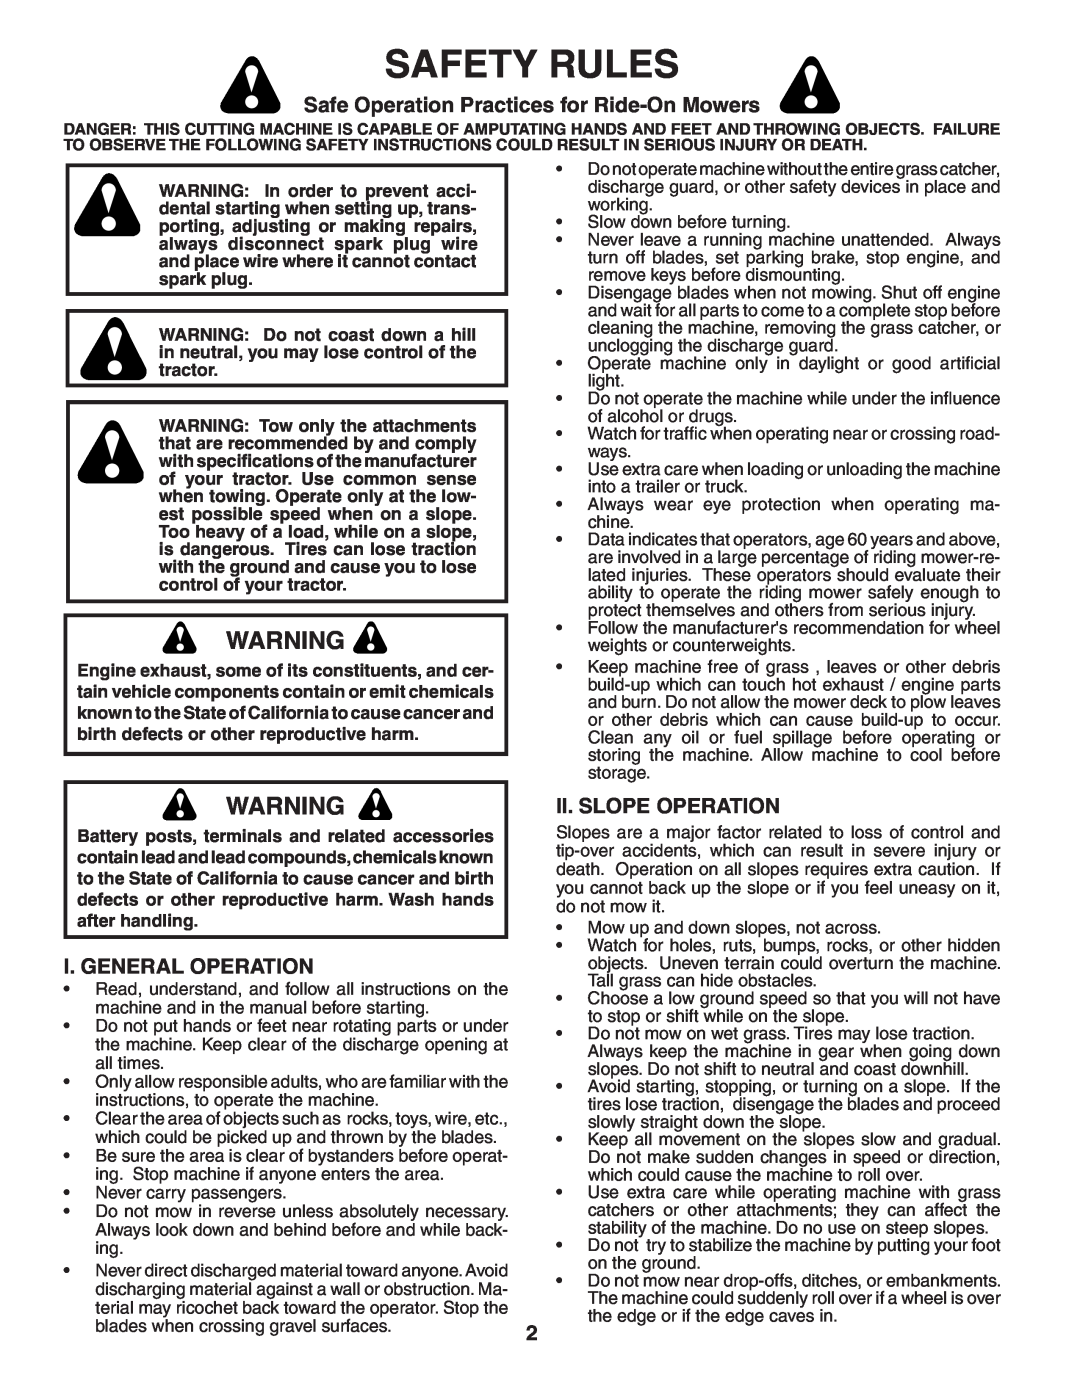 Poulan 405327 manual Safety Rules, Safe Operation Practices for Ride-On Mowers, I. General Operation, Ii. Slope Operation 